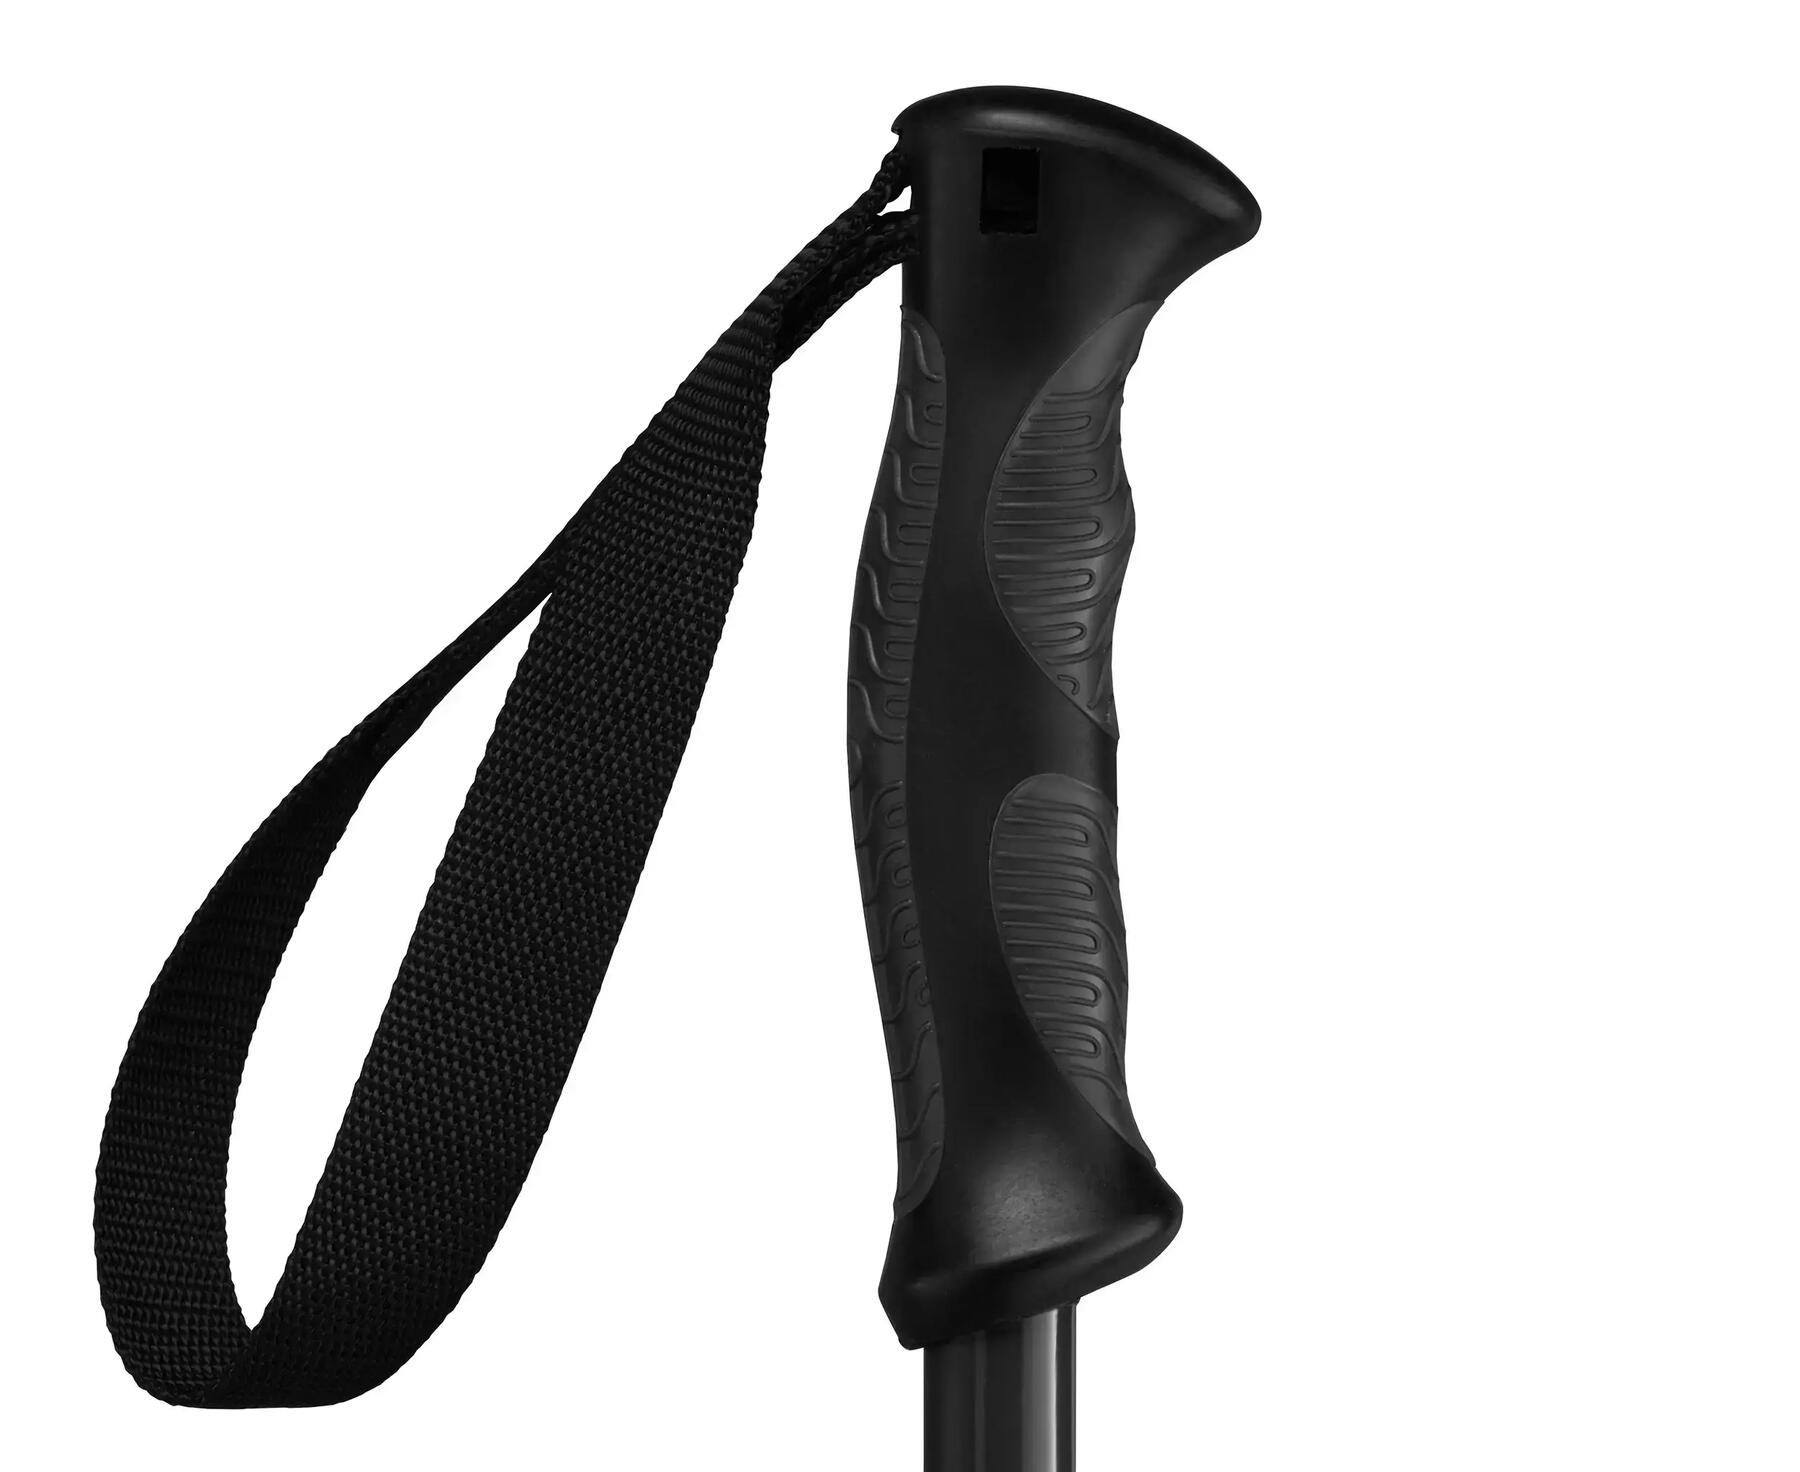 A ski pole grip with a dual material construction